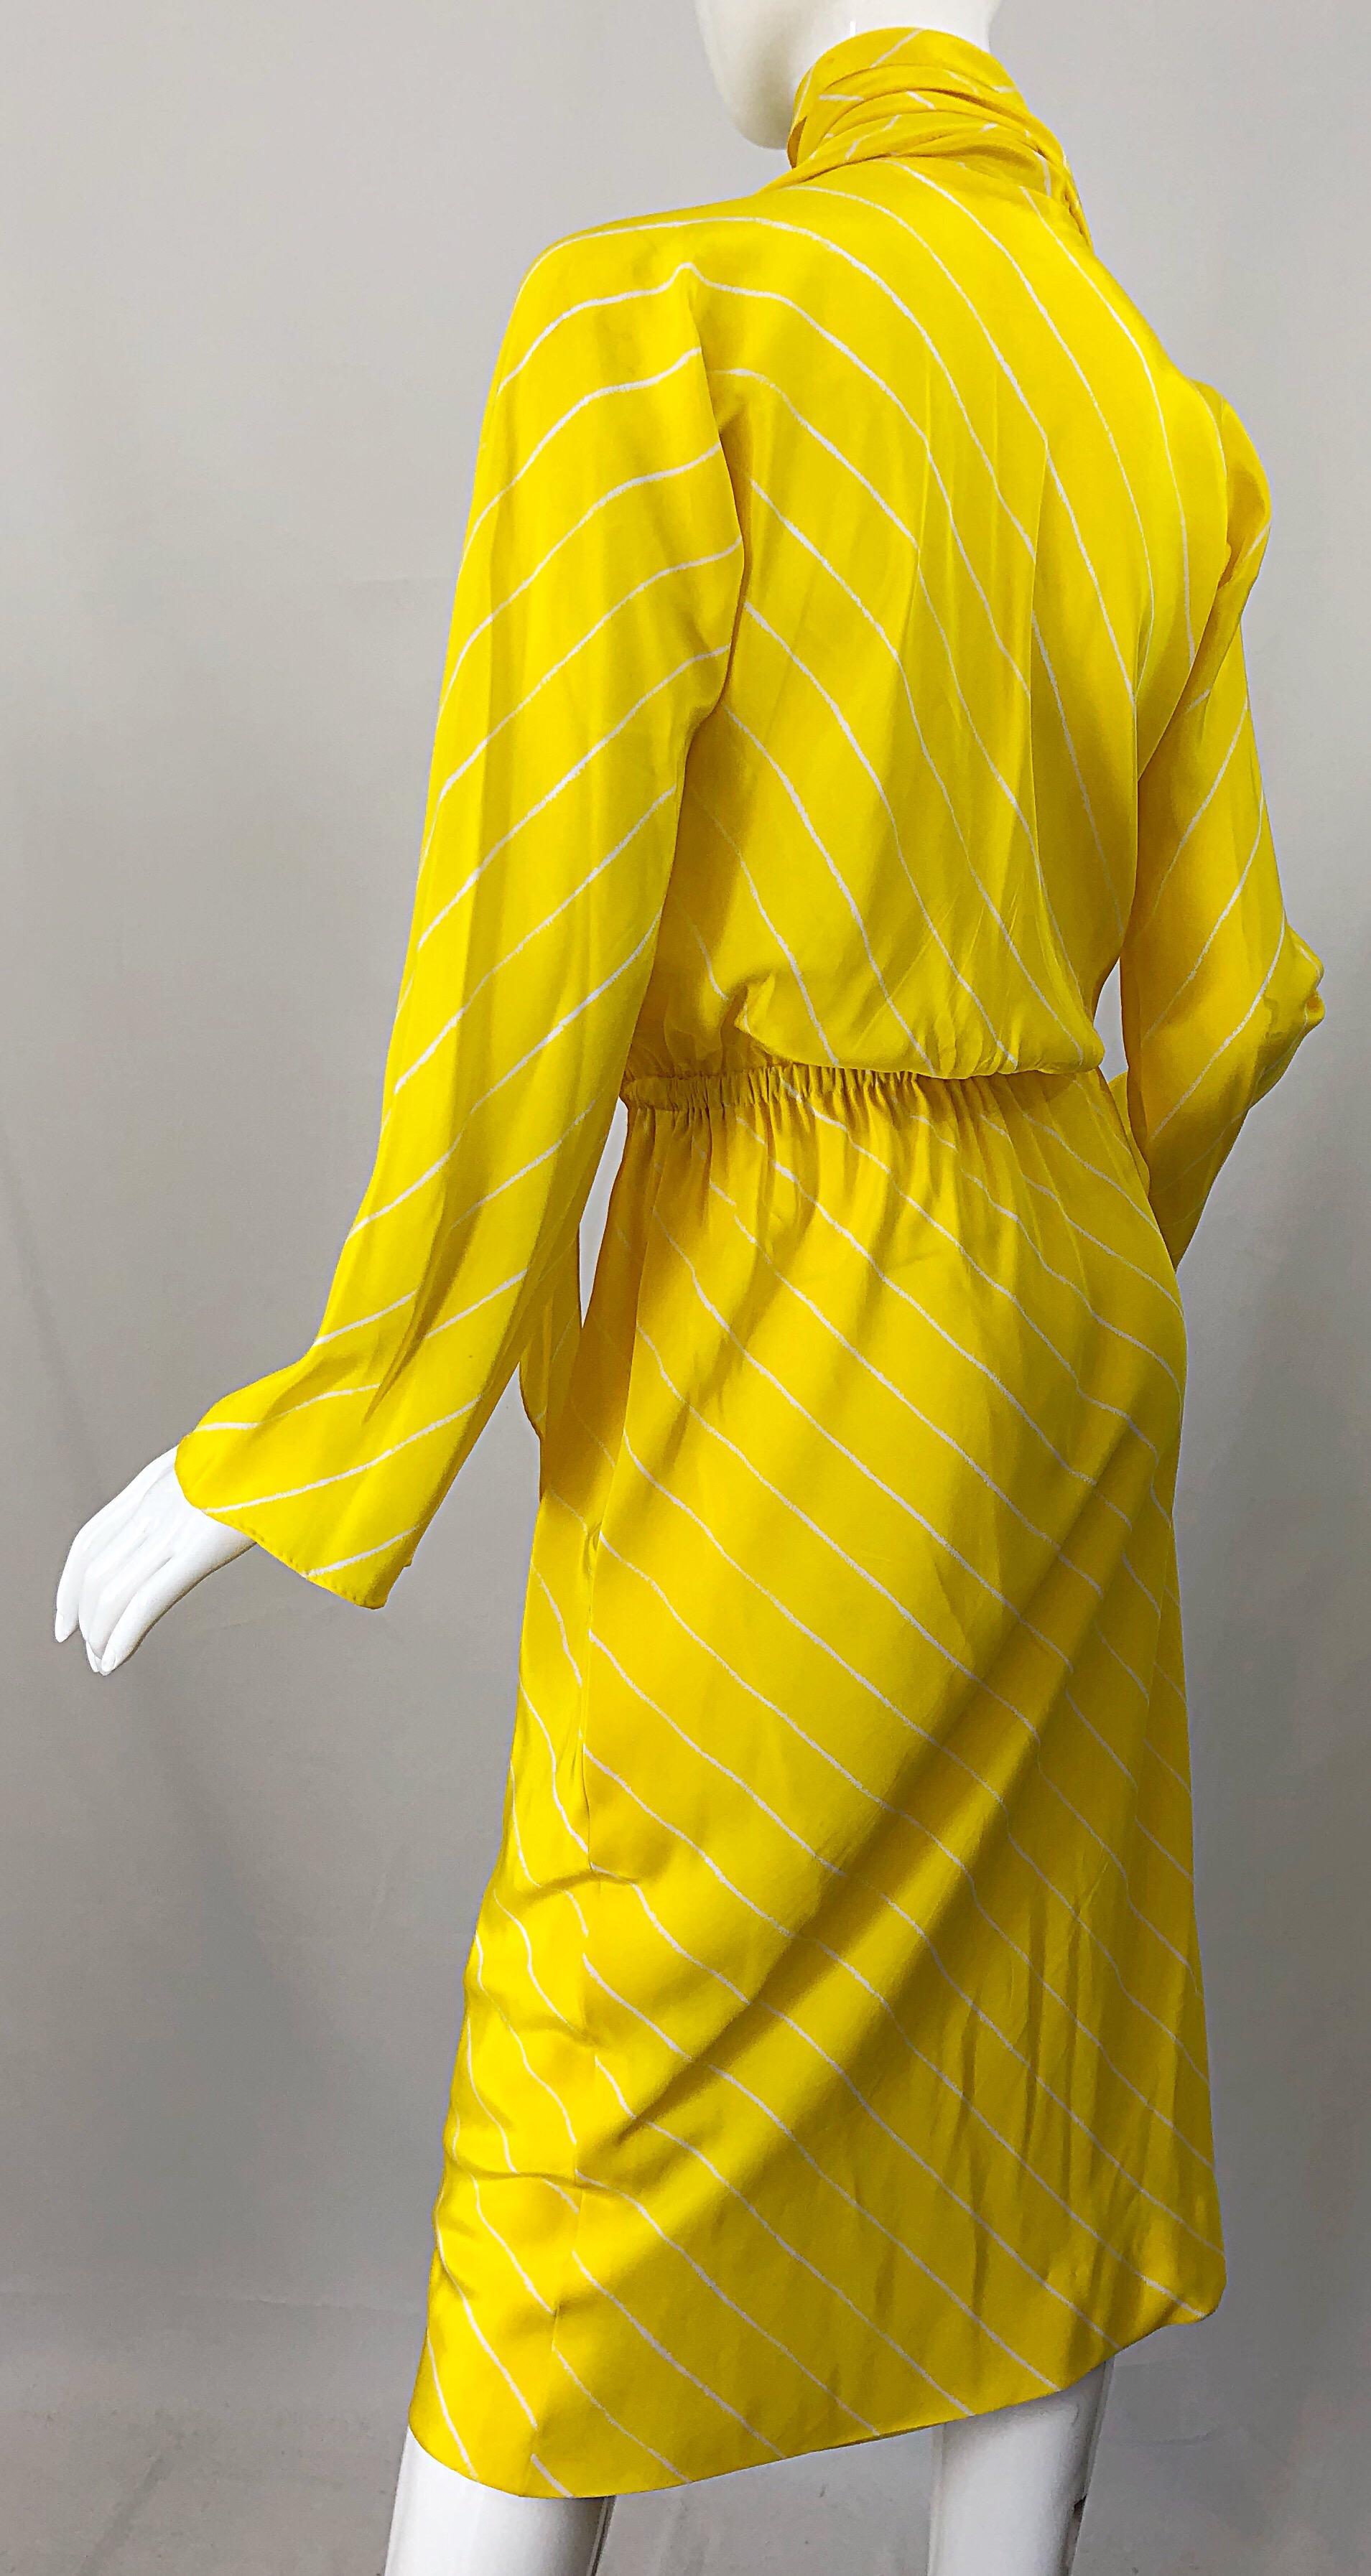 1970s Halston Canary Yellow + White Chevron Striped Bell Sleeve 70s Scarf Dress 2